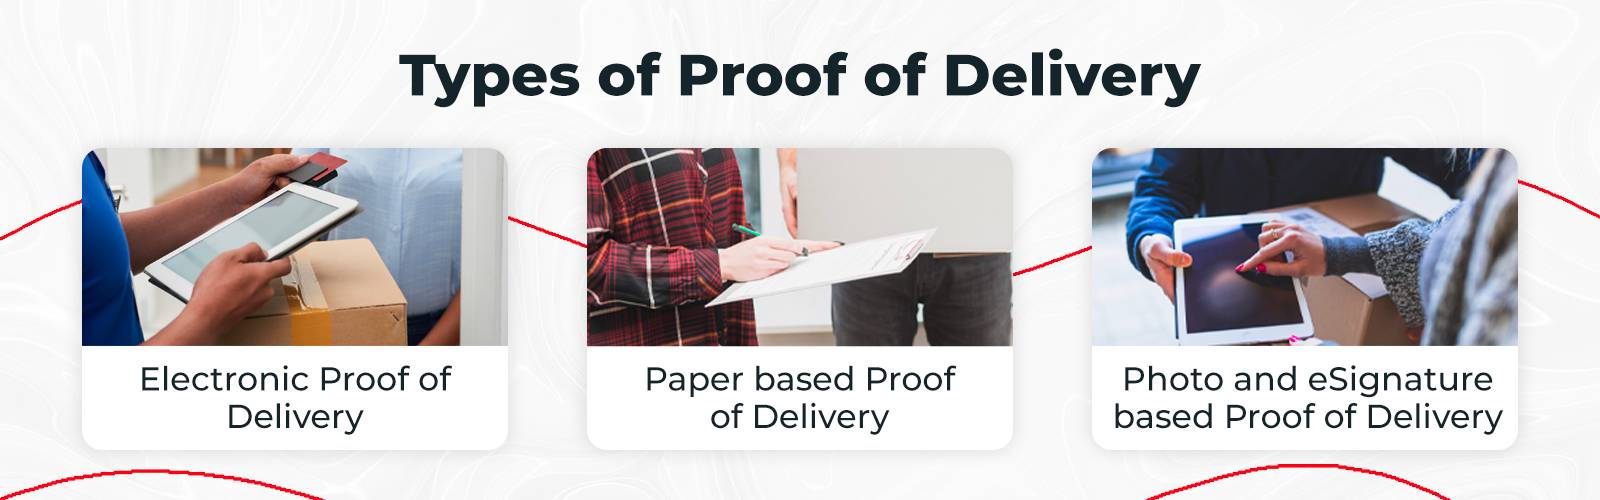 Types of proof of delivery